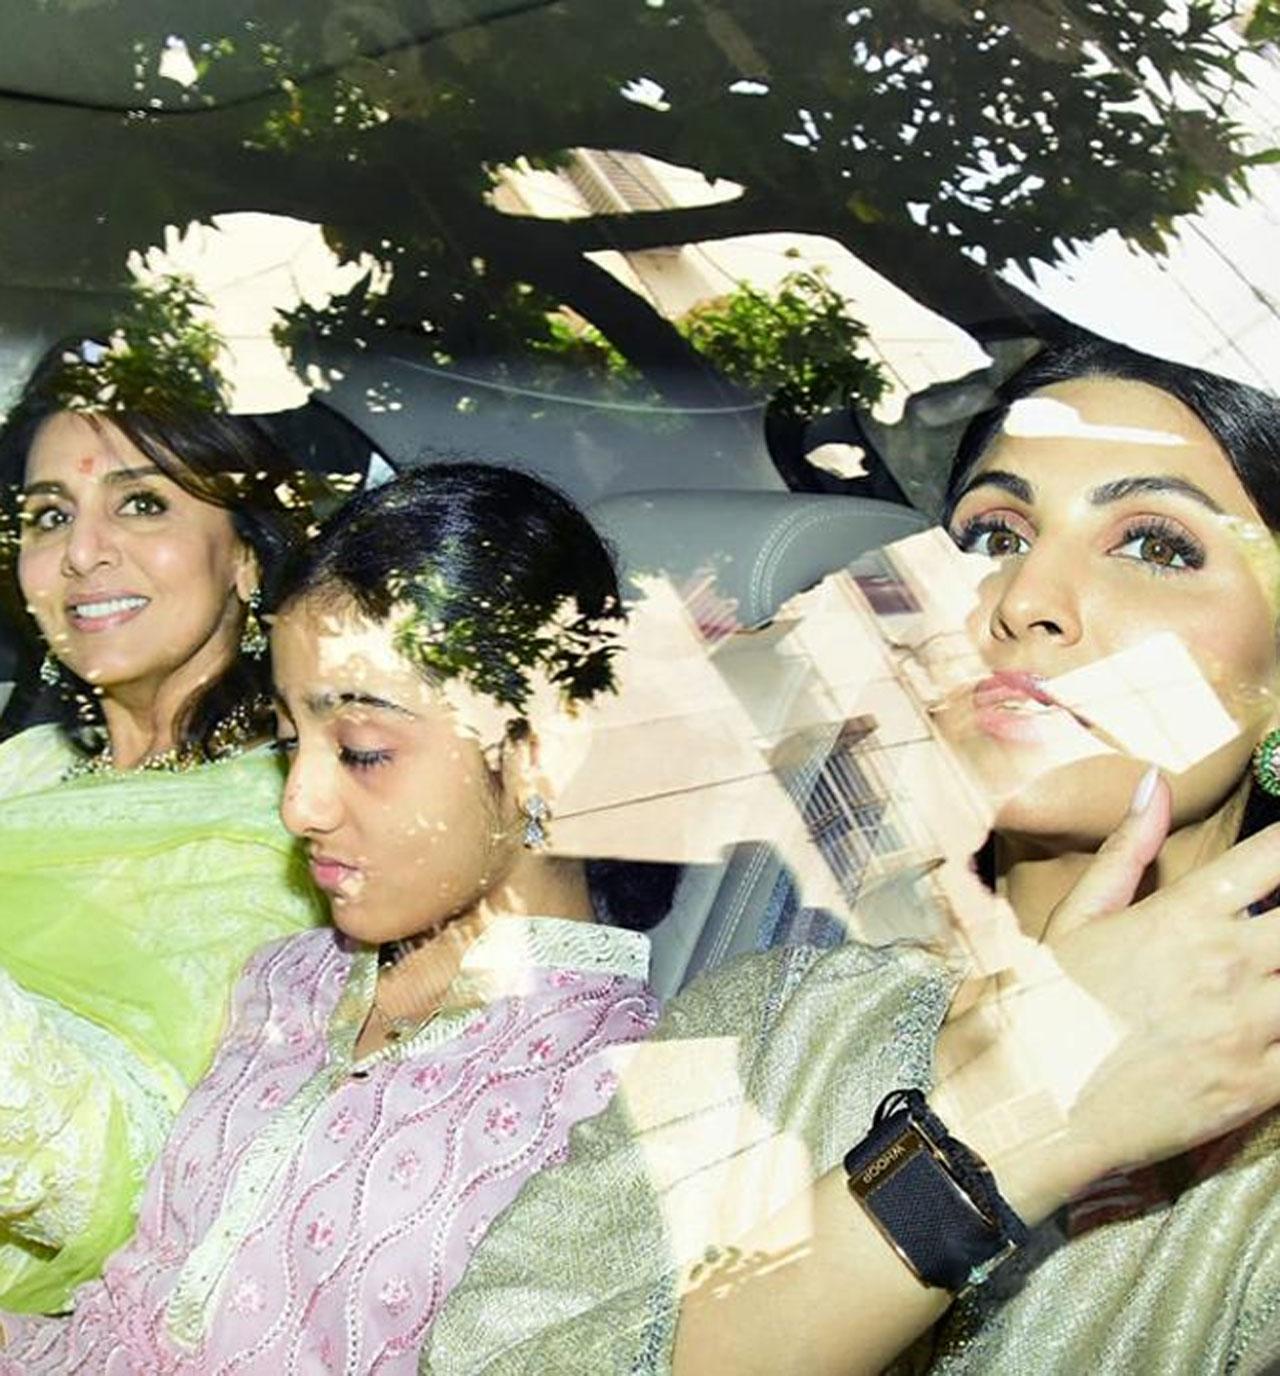 In another photo captured by the photographers, we saw Neetu Kapoor and daughter Riddhima Kapoor Sahni decked up in traditional attire. Riddhima’s daughter Samaira was also spotted in the photo. Neetu Kapoor smiling away as the paparazzi took photos. Considering it is a Punjabi shaadi in the Kapoor clan, who are known to be major foodies, Neetu Kapoor has reportedly flown down chefs from Delhi and Lucknow to whip up several specialities for the celebratory events. The paparazzi asked Neetu Kapoor about Ranbir-Alia's wedding dates on multiple occasions over the last few days, but the veteran actress has always dodged questions with a smile. 